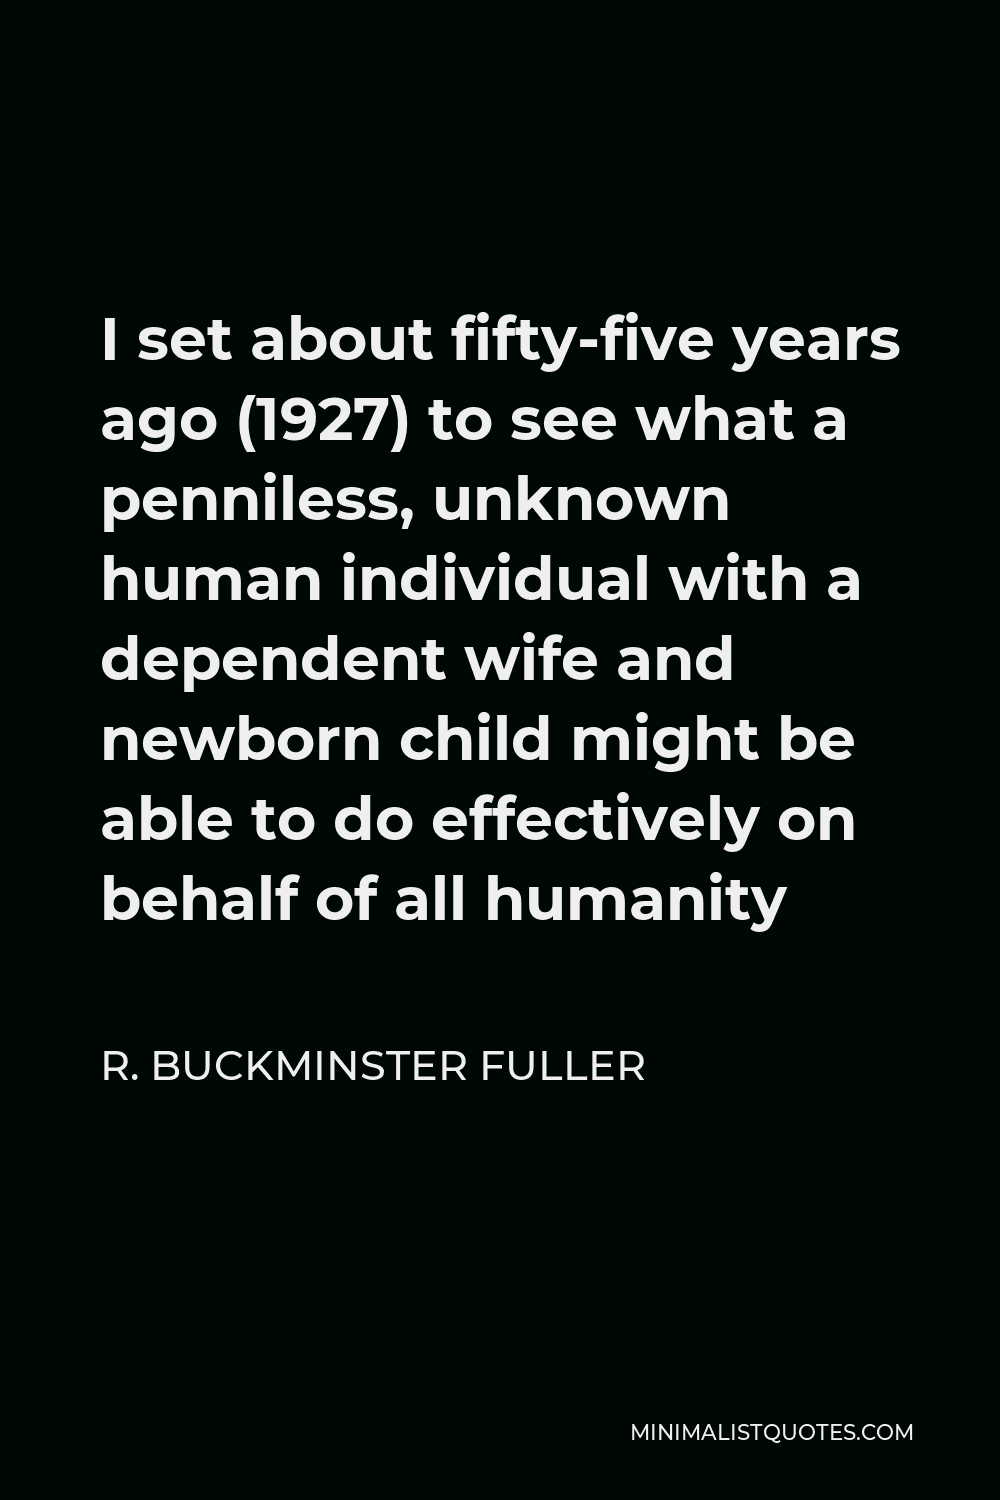 R. Buckminster Fuller Quote - I set about fifty-five years ago (1927) to see what a penniless, unknown human individual with a dependent wife and newborn child might be able to do effectively on behalf of all humanity